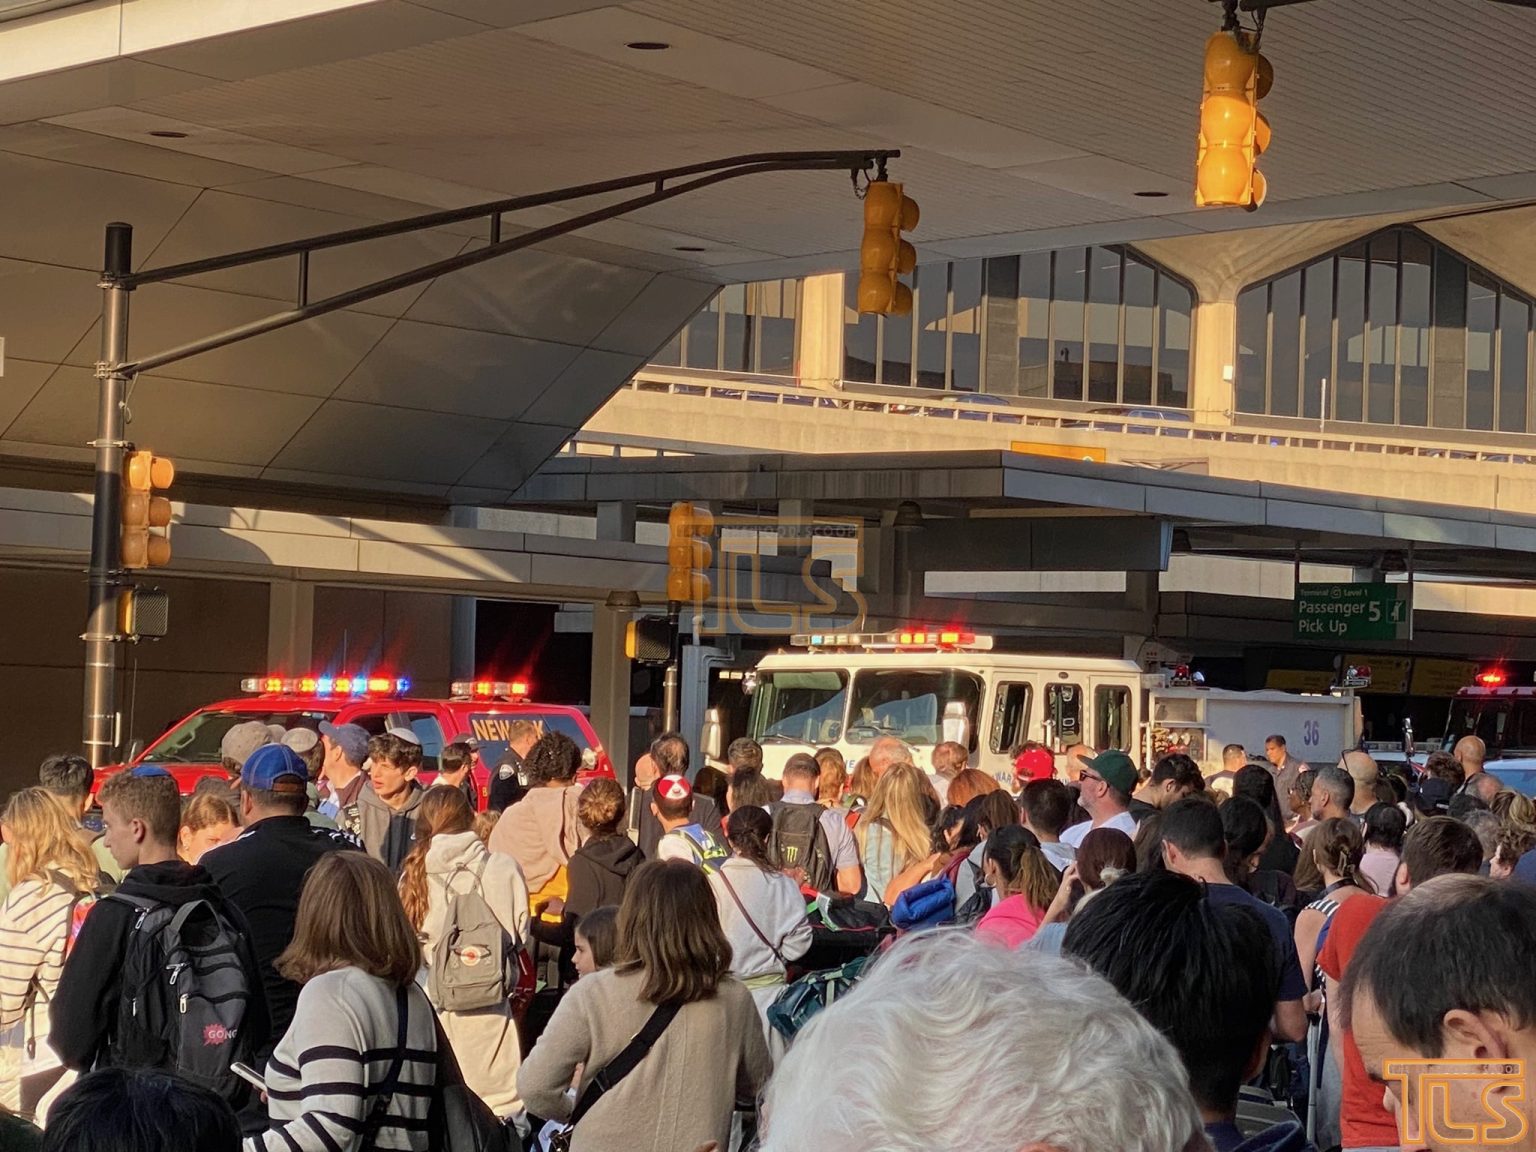 DEVELOPING Portion of Newark Airport Evacuated; Bomb Squad on Scene